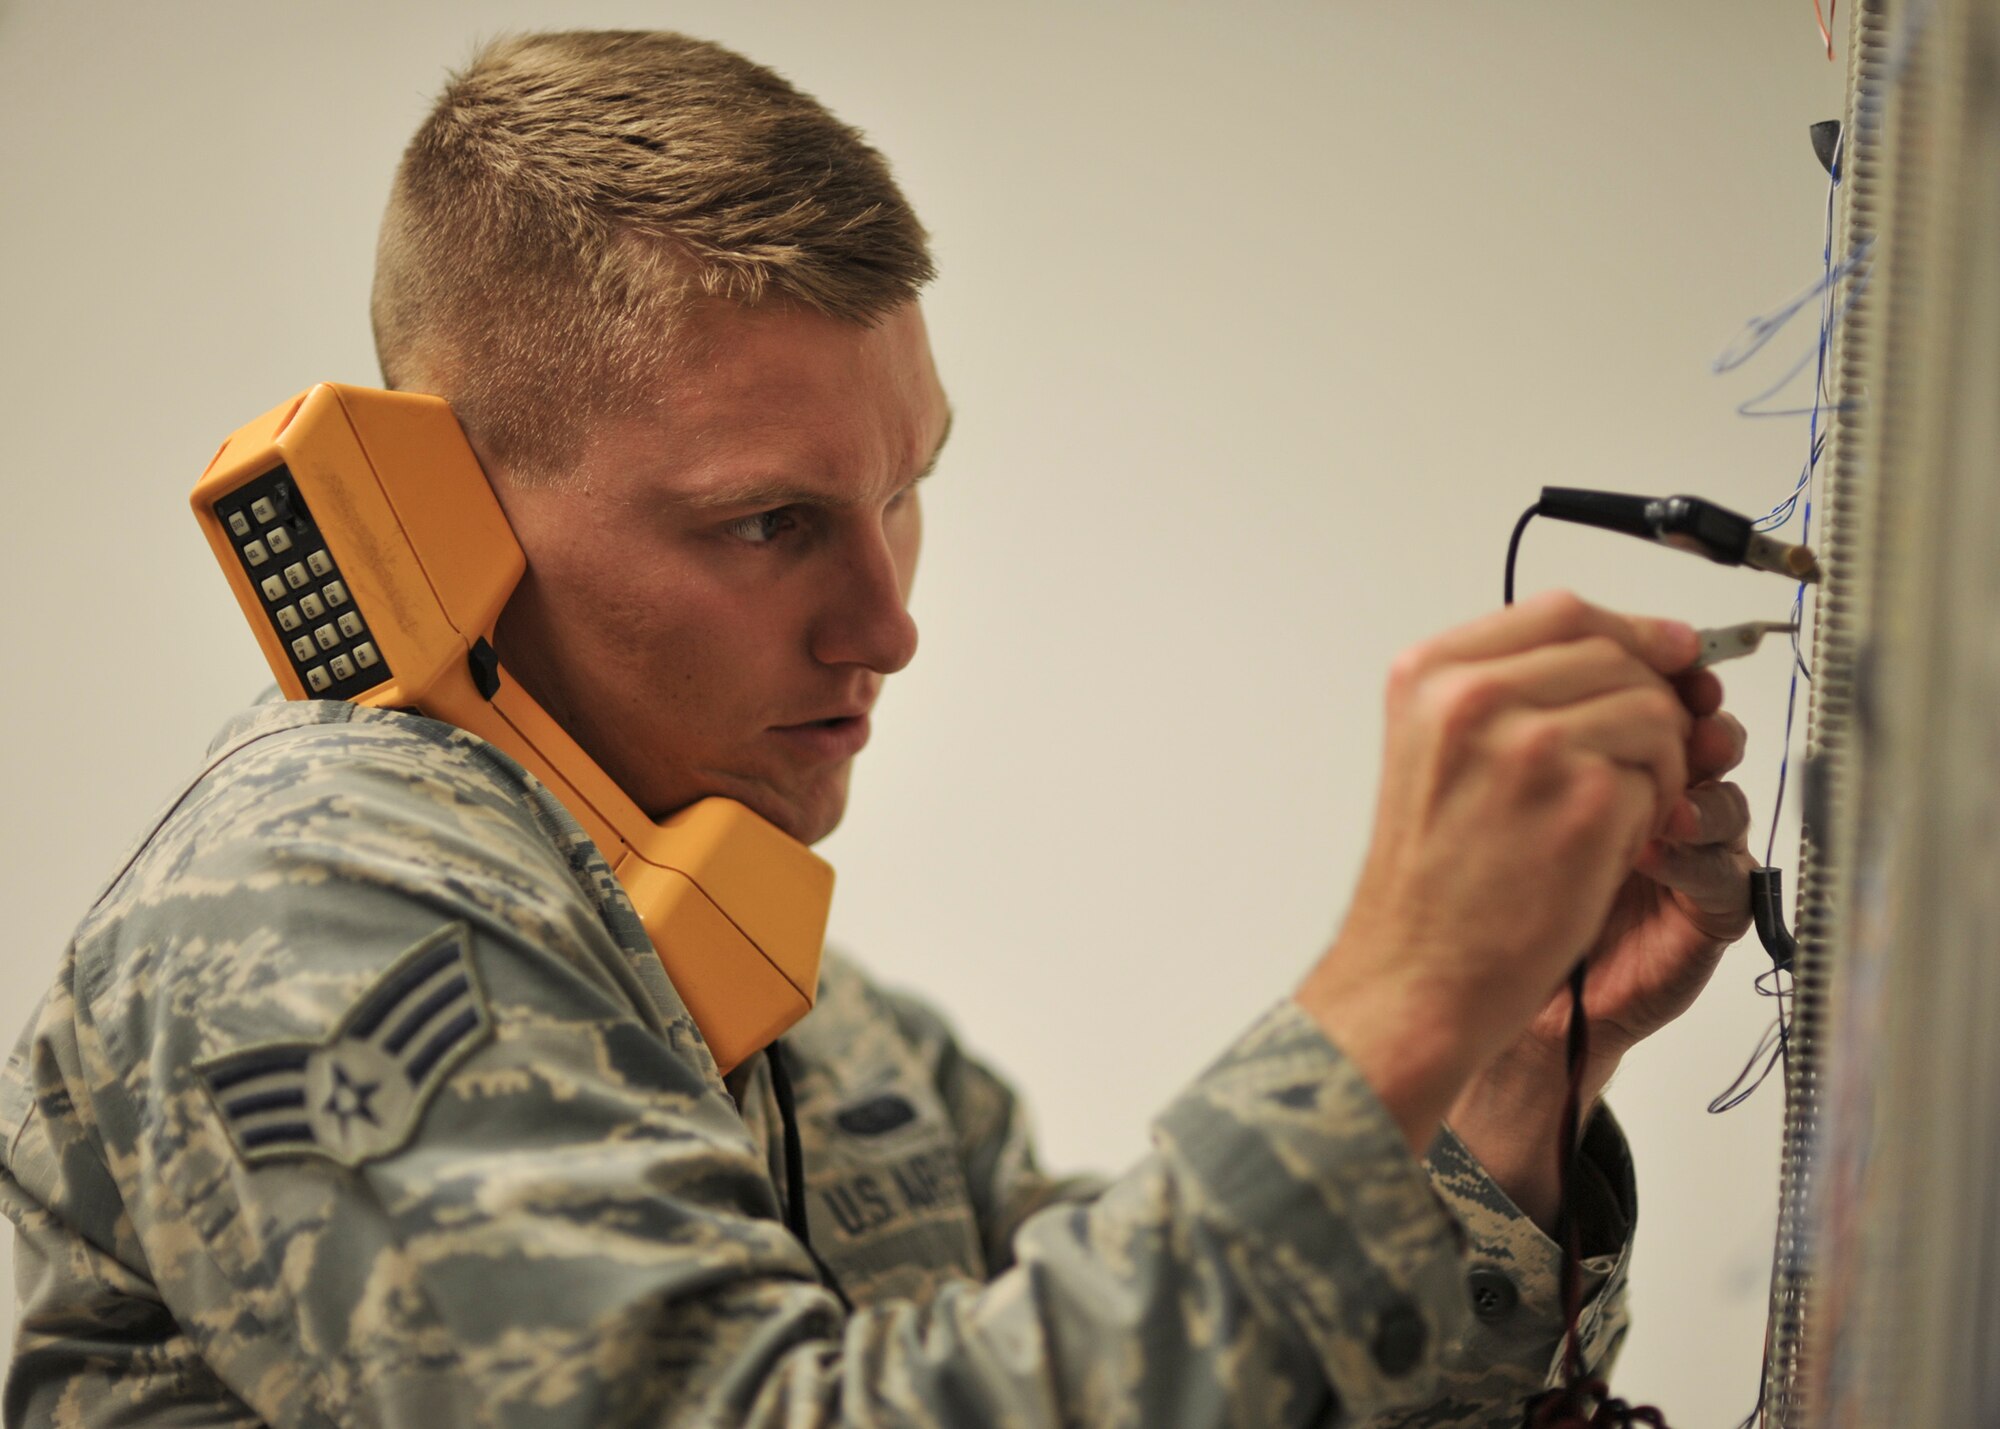 U.S. Air Force Senior Airman Tory Osmundson, 325th Communications Squadron client systems technician, performs maintenance on a phone line in the 325th CS Annex on Tyndall Air Force Base, Fla., Aug. 3, 2016. Whenever a customer has a problem with a phone or computer, Osmundson and his shop are responsible for fixing it. (U.S. Air Force photo by Senior Airman Dustin Mullen/Released)